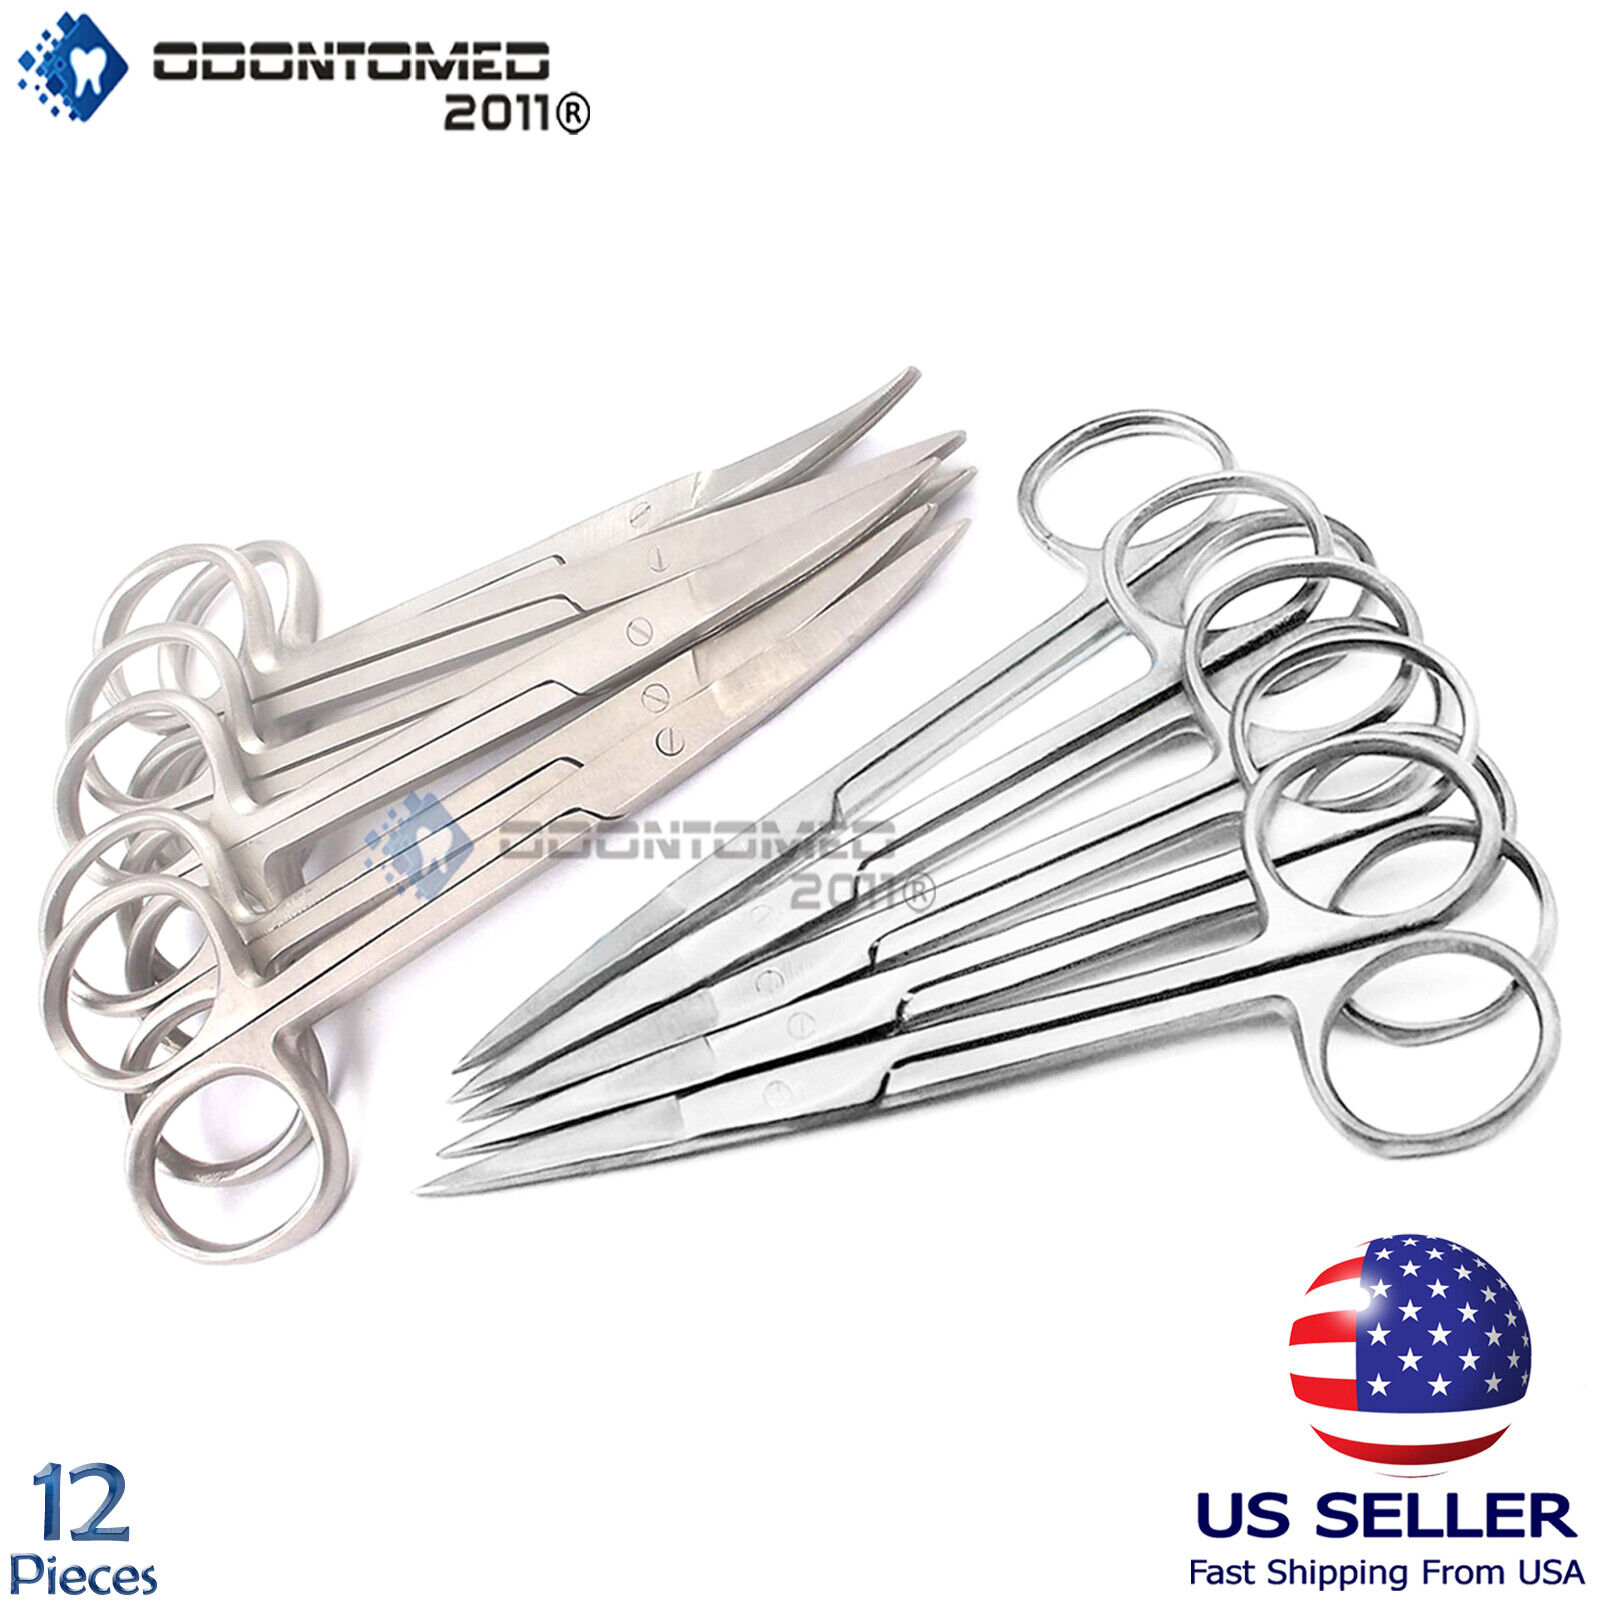 12 Iris Scissors 4.5" Curved & Straight Surgical Dental Instruments ODM Does Not Apply